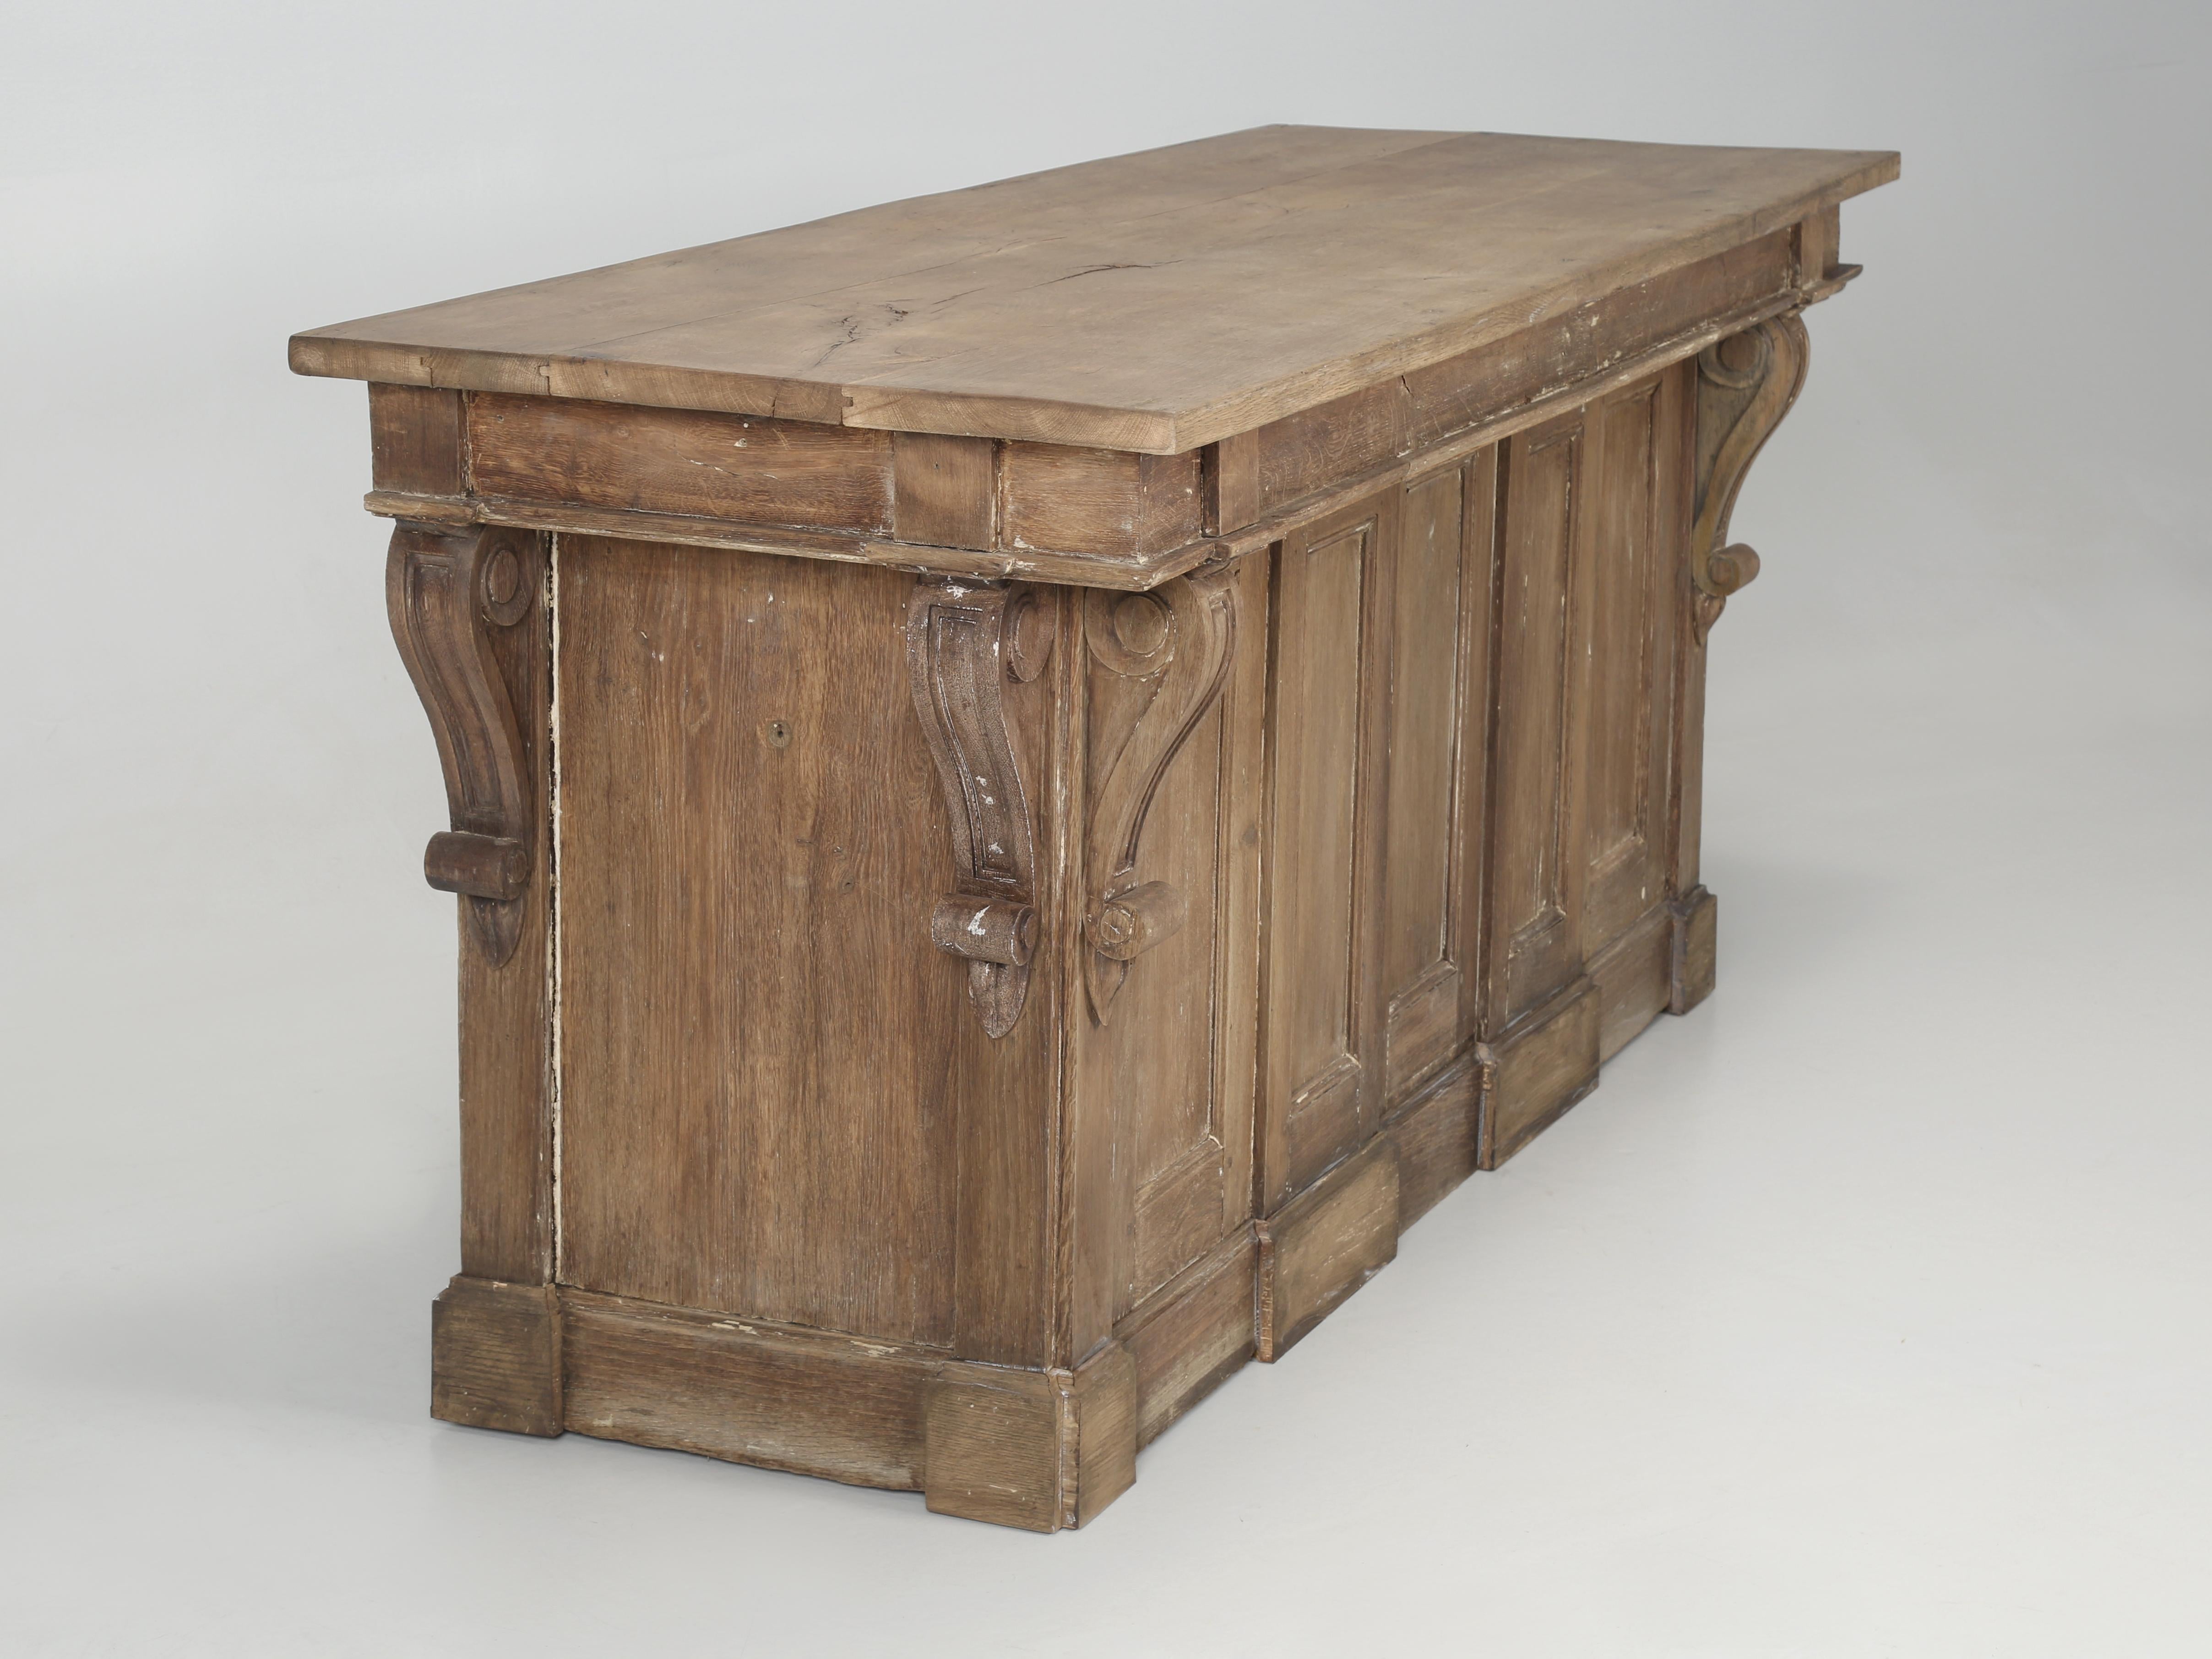 Antique French Store Counter Repurposed by our Old Plank Artisans into a Country French Style Kitchen Island. The Antique White French Oak from our Store Counter had just the perfect amount of Original 100-year-old Patina, that our Old Plank